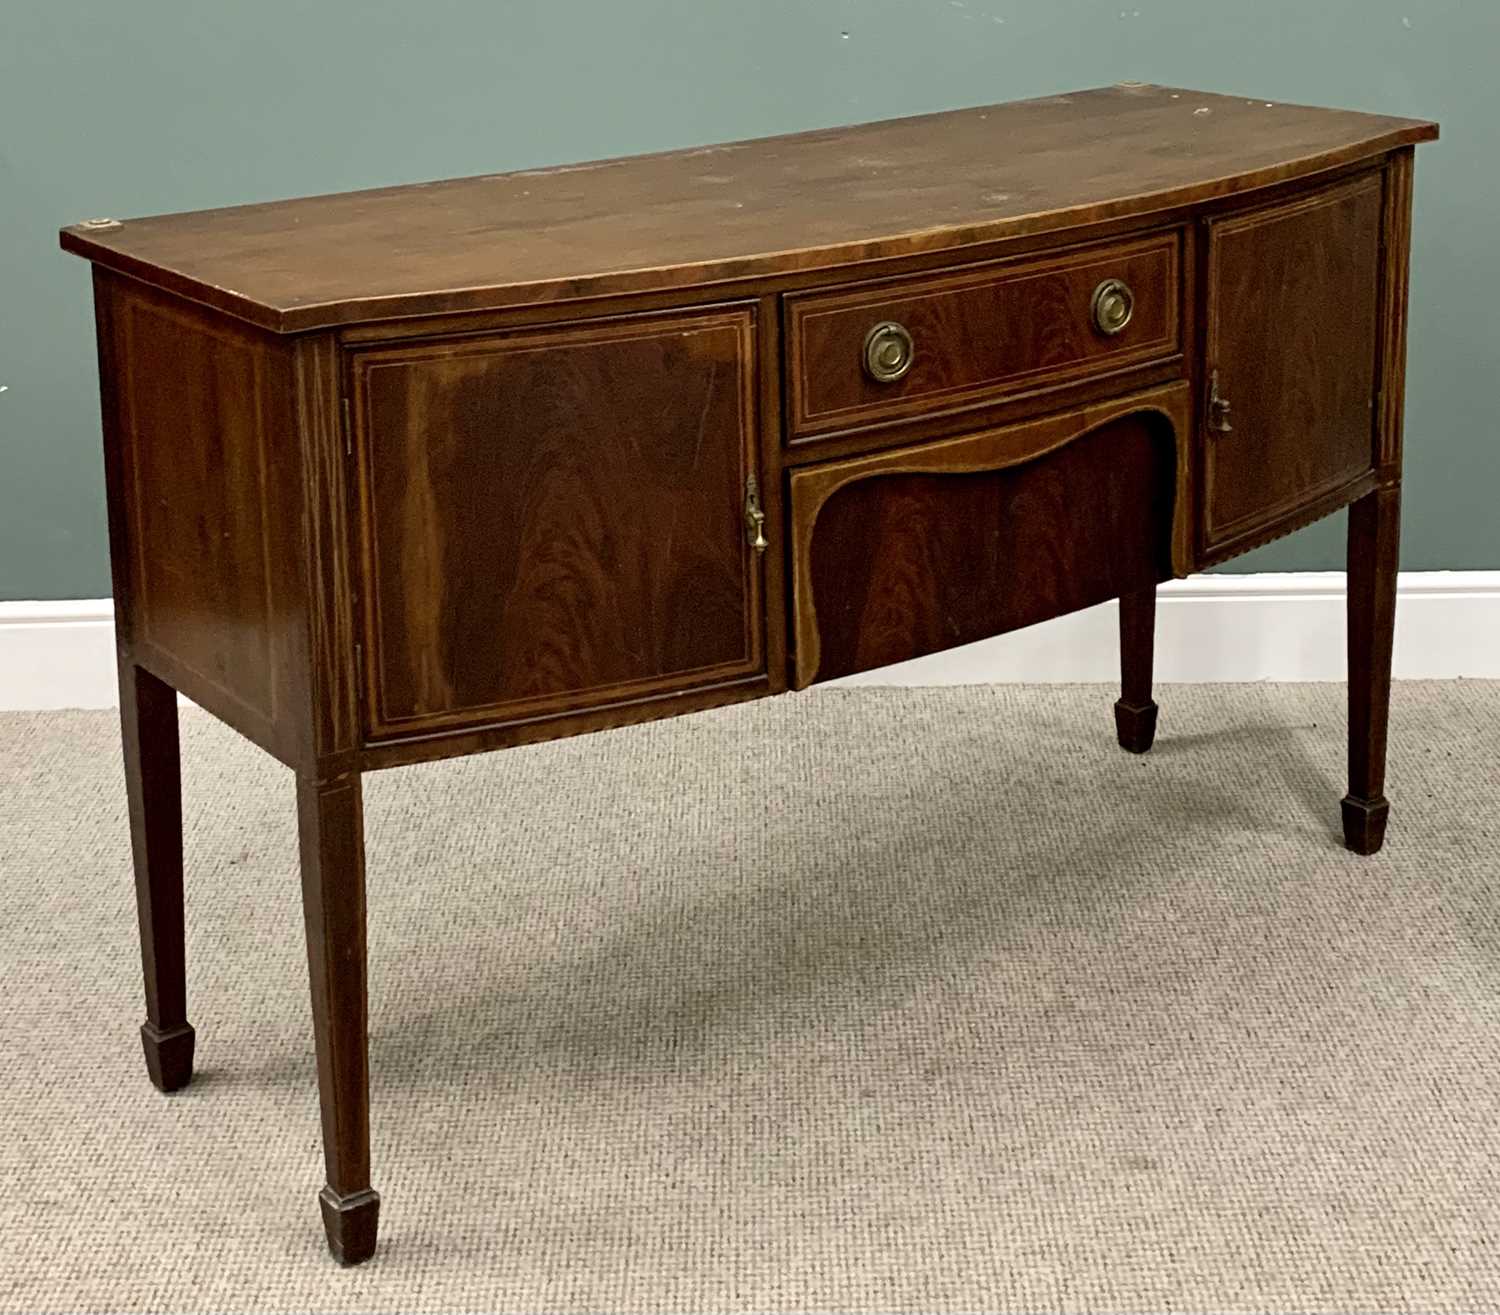 REGENCY STRING INLAID MAHOGANY SIDEBOARD - bow fronted, on spade feet, 94cms H, 154cms W, 59cms D - Image 2 of 6